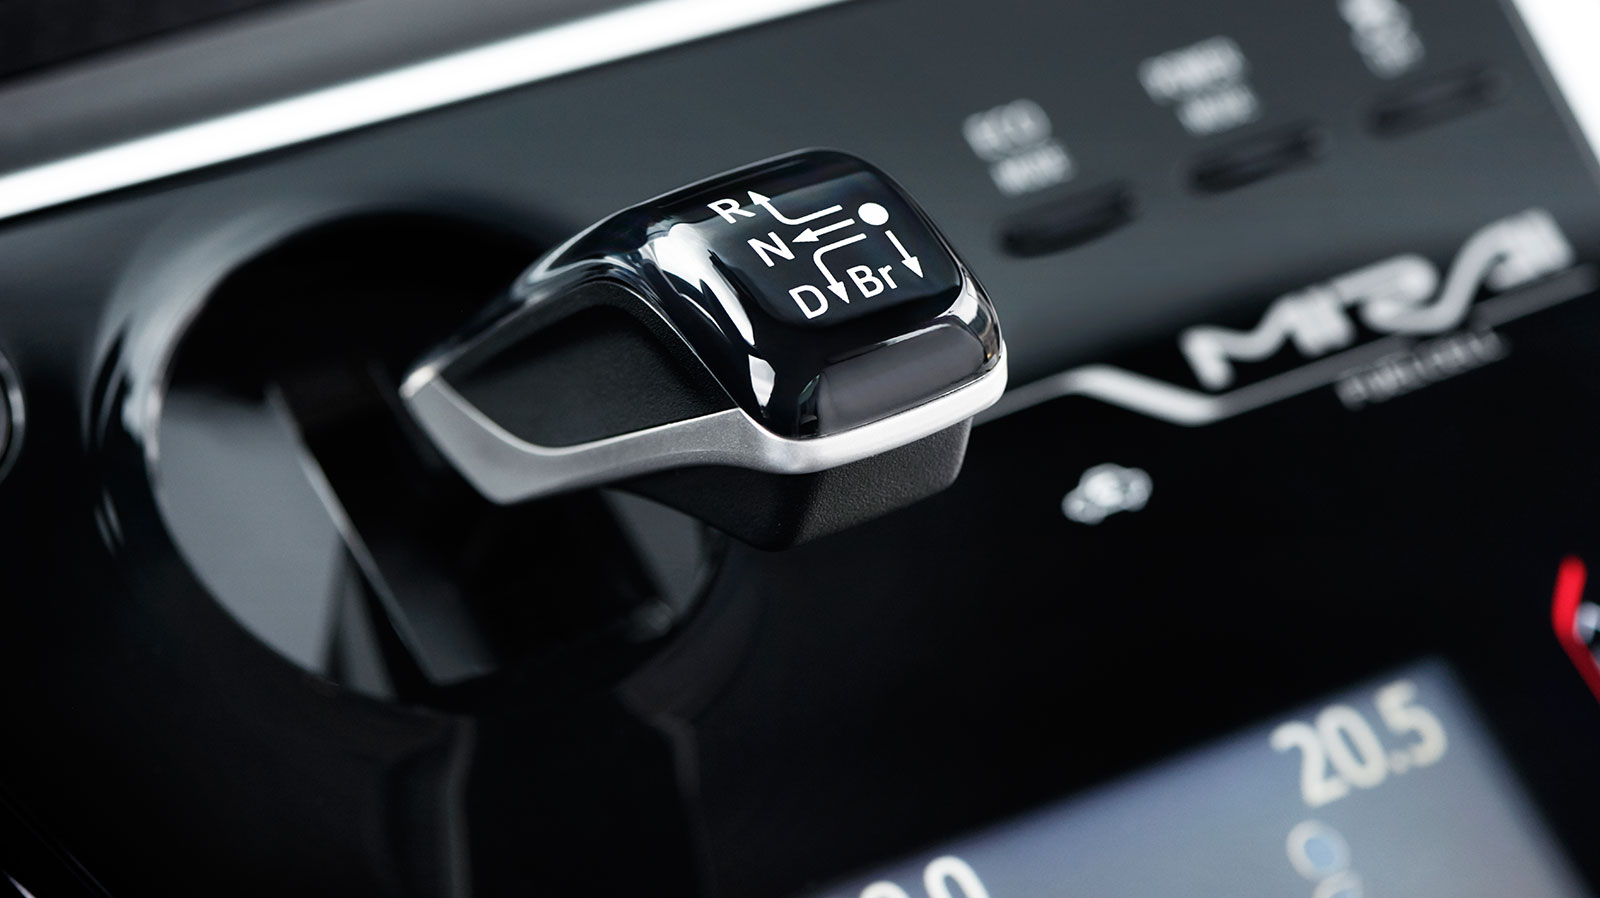 Mirai, Fuel Cell, driving, Germany, gear knob, automatic